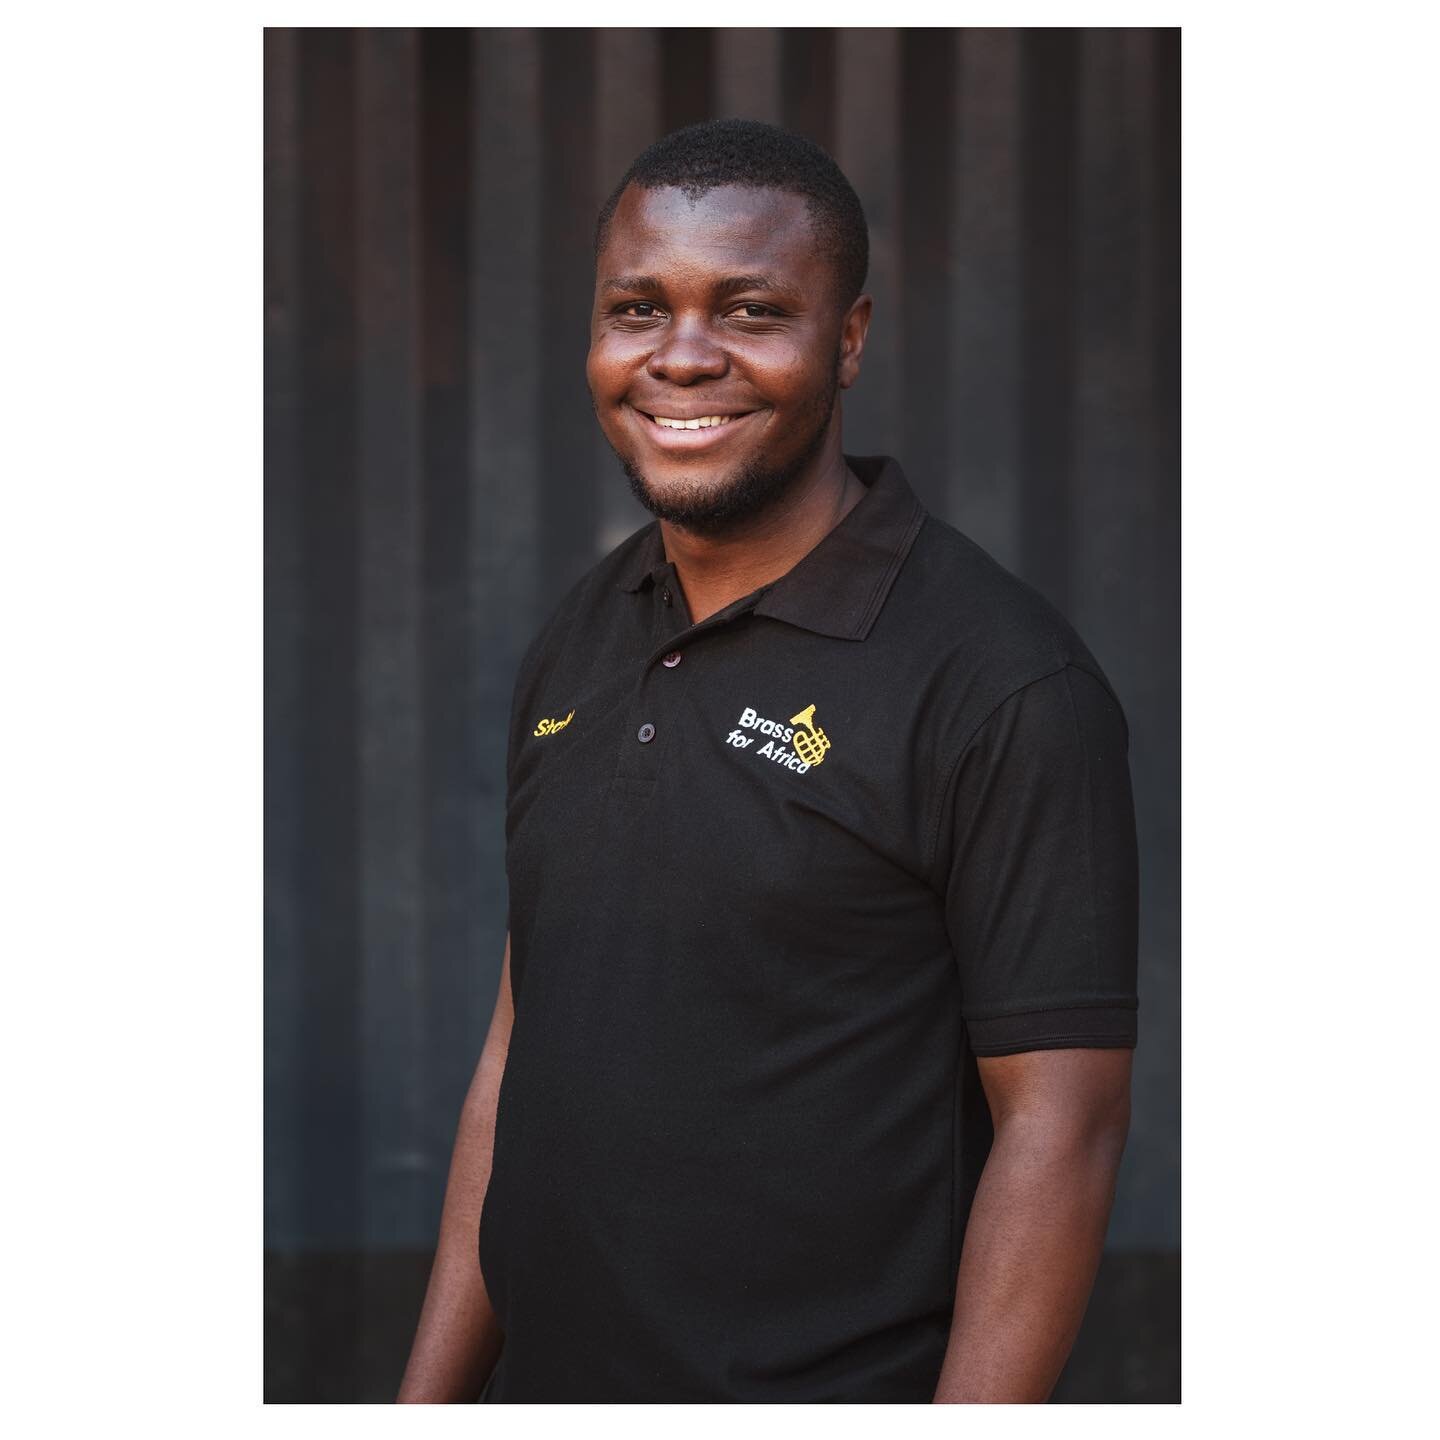 Our Project Manager Daniel is working in our office in Yumbe, north Uganda. He has been part of our team since the beginning of the year, managing and organizing our LAB UGANDA project. Daniel is Ronald&rsquo;s brother (our former project manager). T